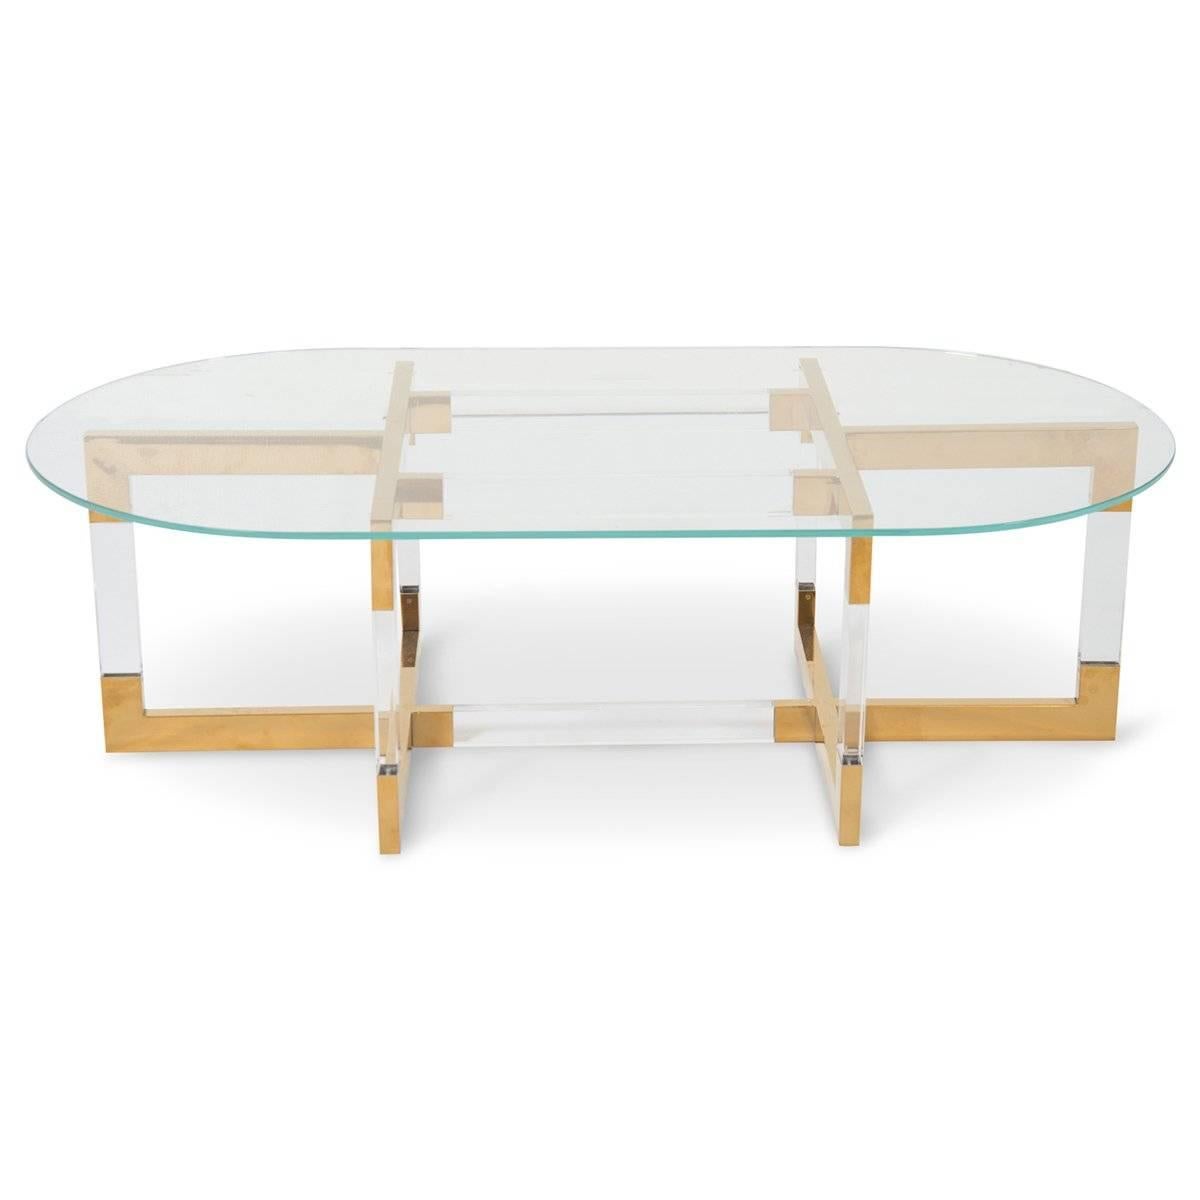 Our new trousdale two coffee table features Lucite and brass in a criss-cross design. Shown with our oval glass top. 

Dimensions:
53